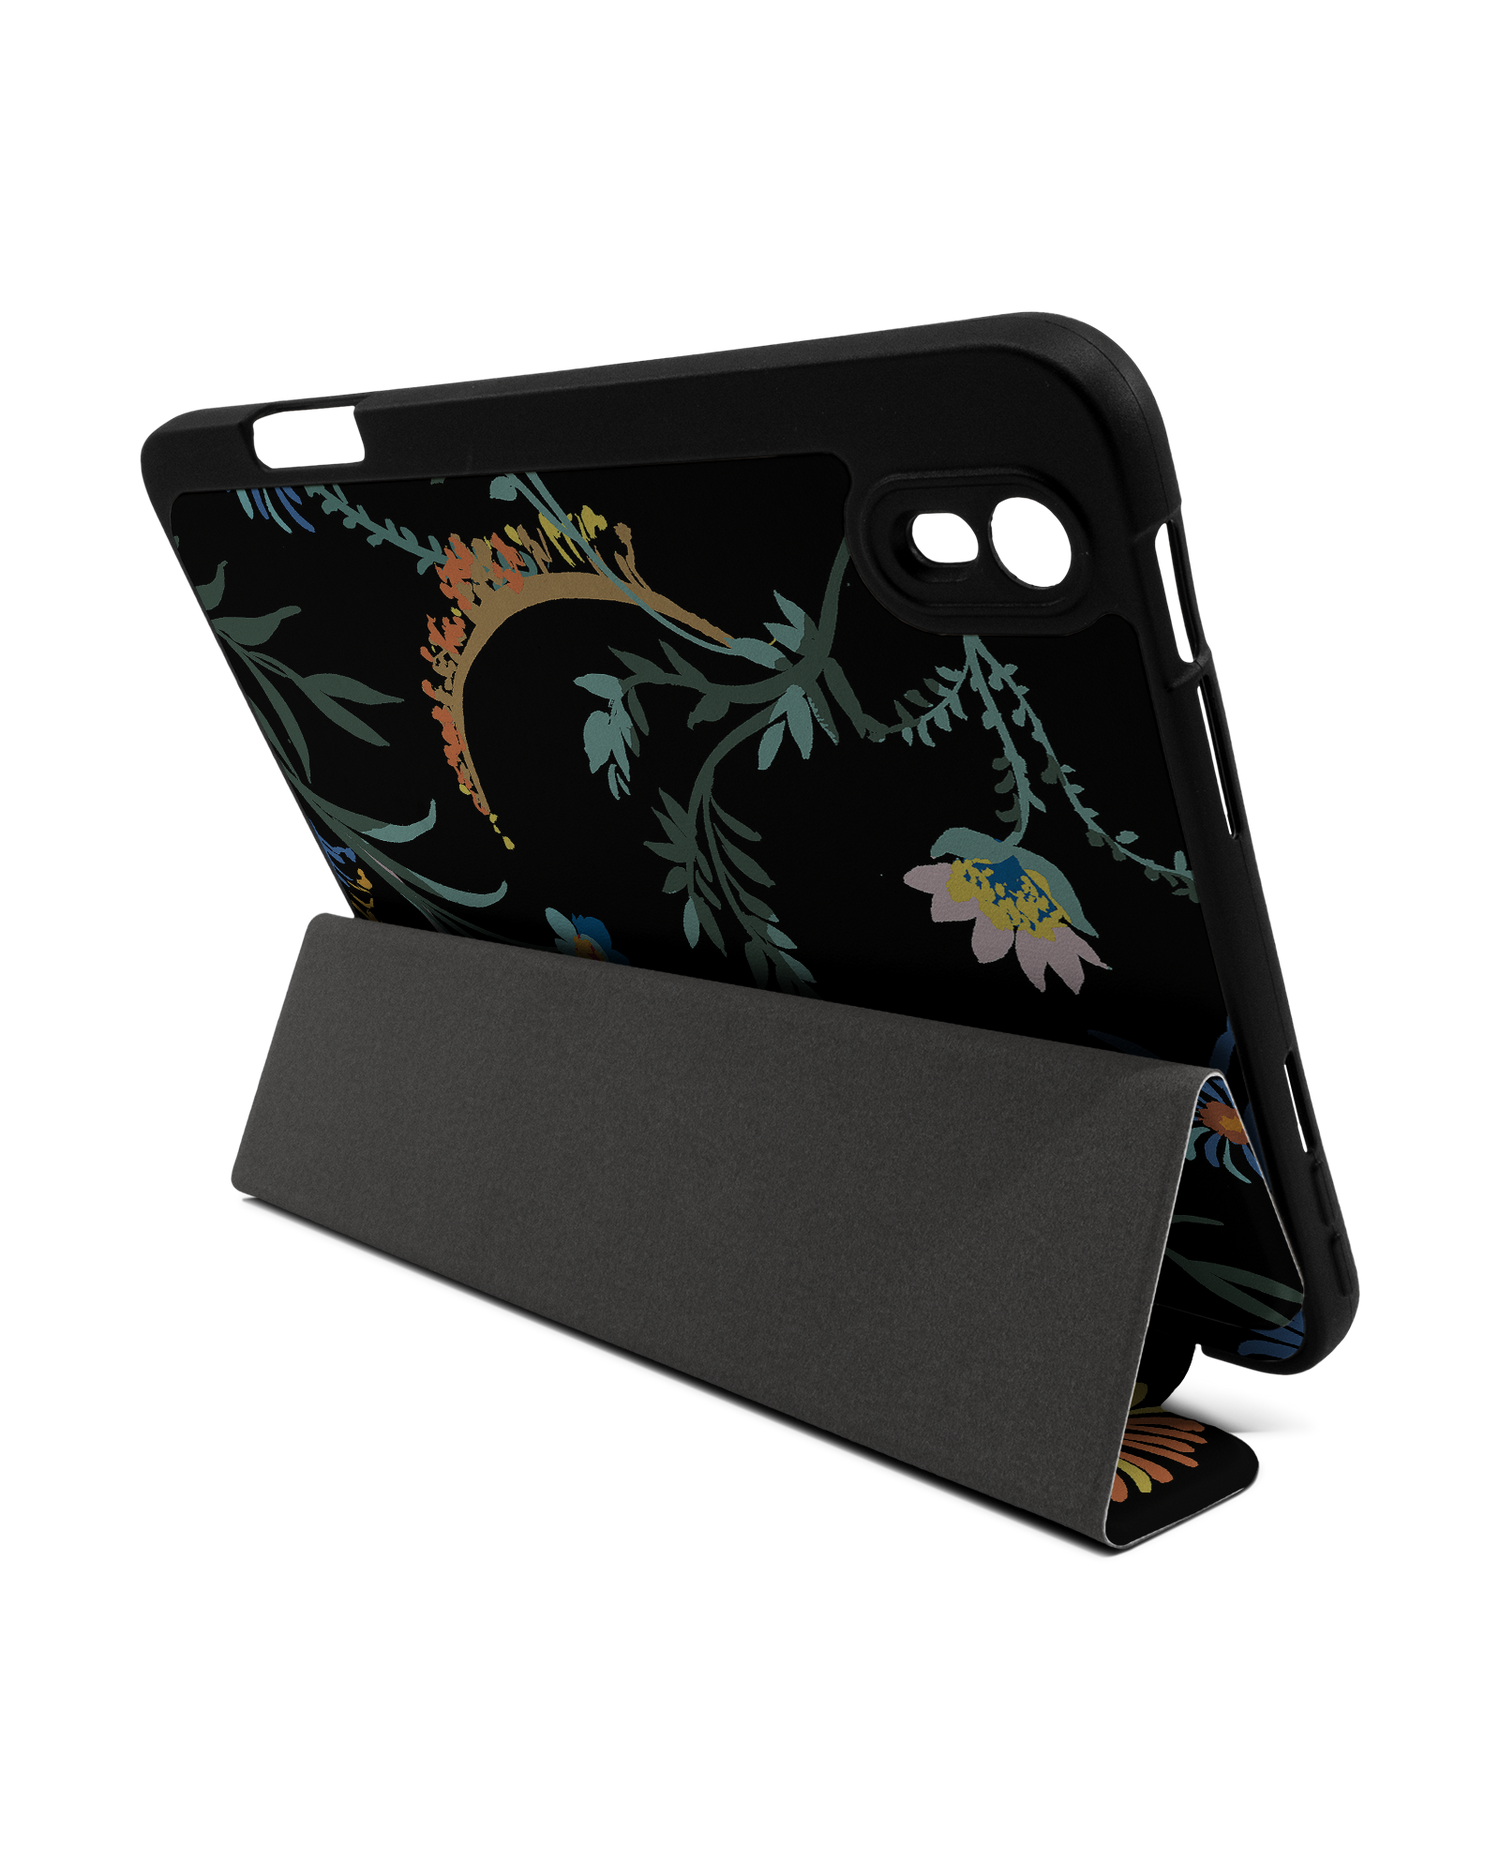 Woodland Spring Floral iPad Case with Pencil Holder Apple iPad mini 6 (2021): Set up in landscape format (back view)